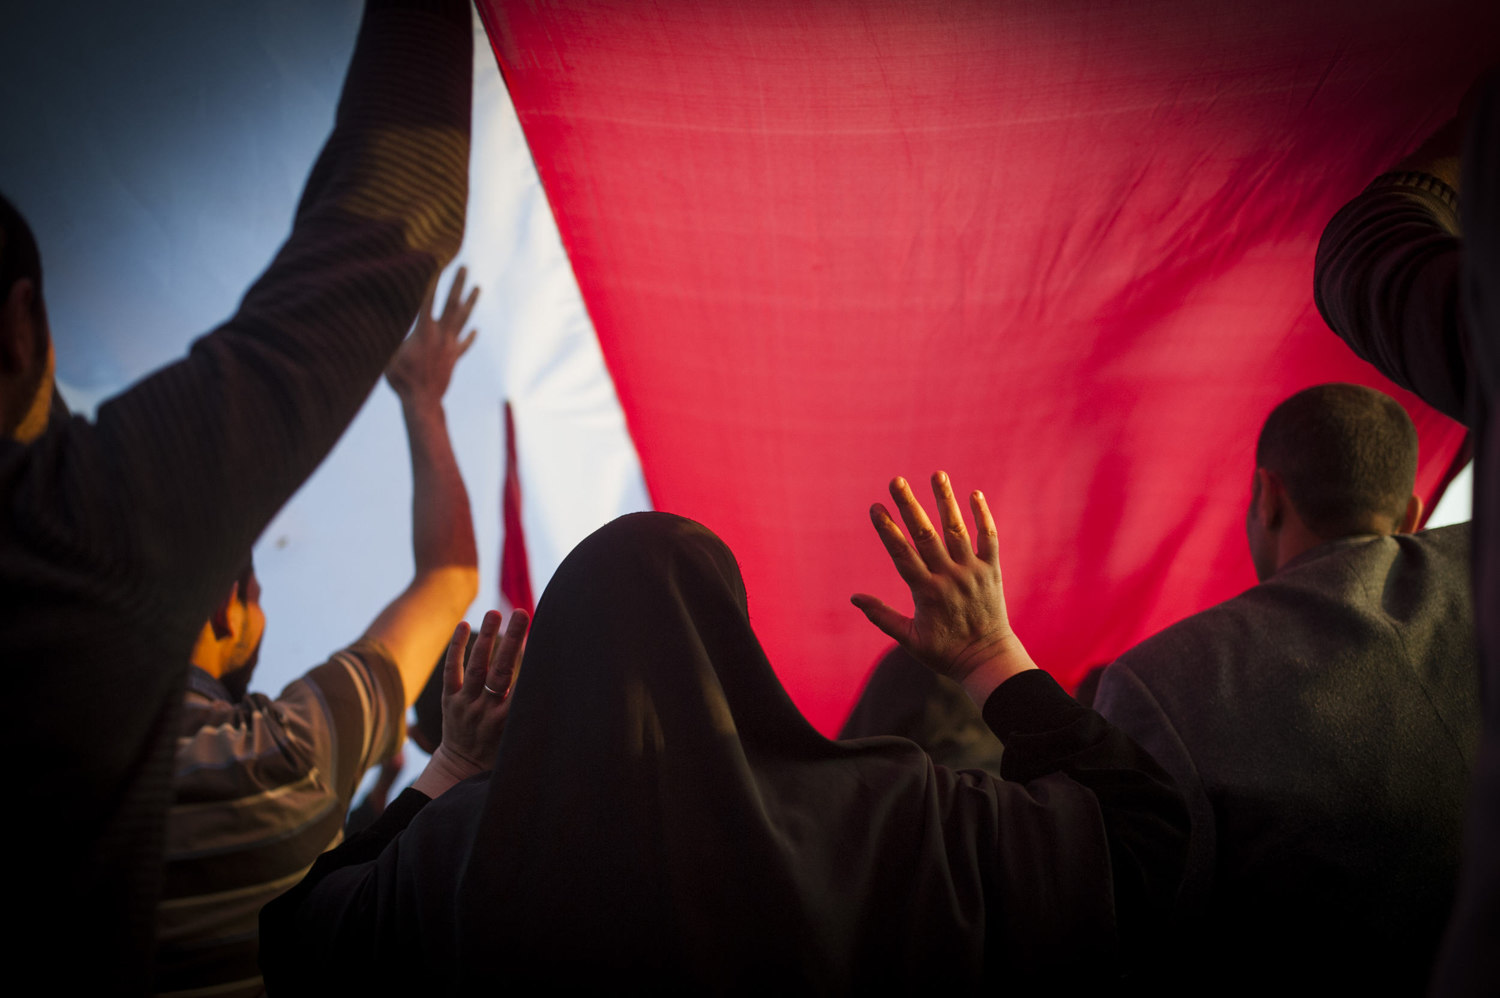  A woman walks under an Egyptian flag in Tahrir Square in Cairo Egypt. After the January 25th protest, demonstrators occupied Tahrir Square in Cairo, Egypt and demanded the overthrow of the regime of Egyptian President Hosni Mubarak. 